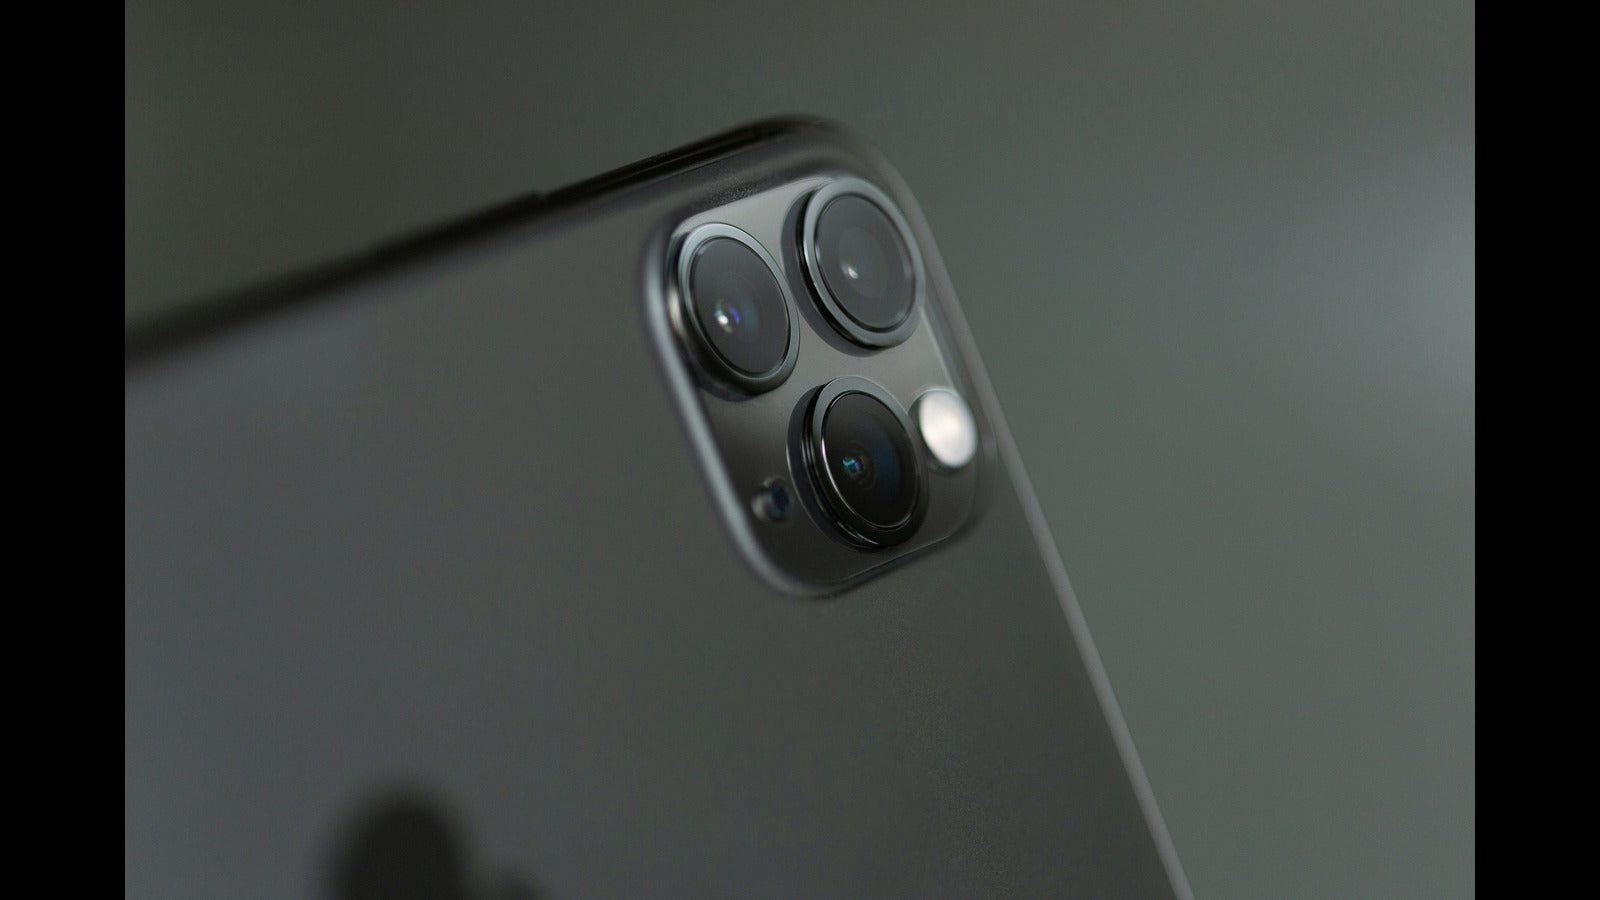 Close-up of the triple-camera system of an iPhone 15 Pro Max, showcasing the sleek design and lenses.